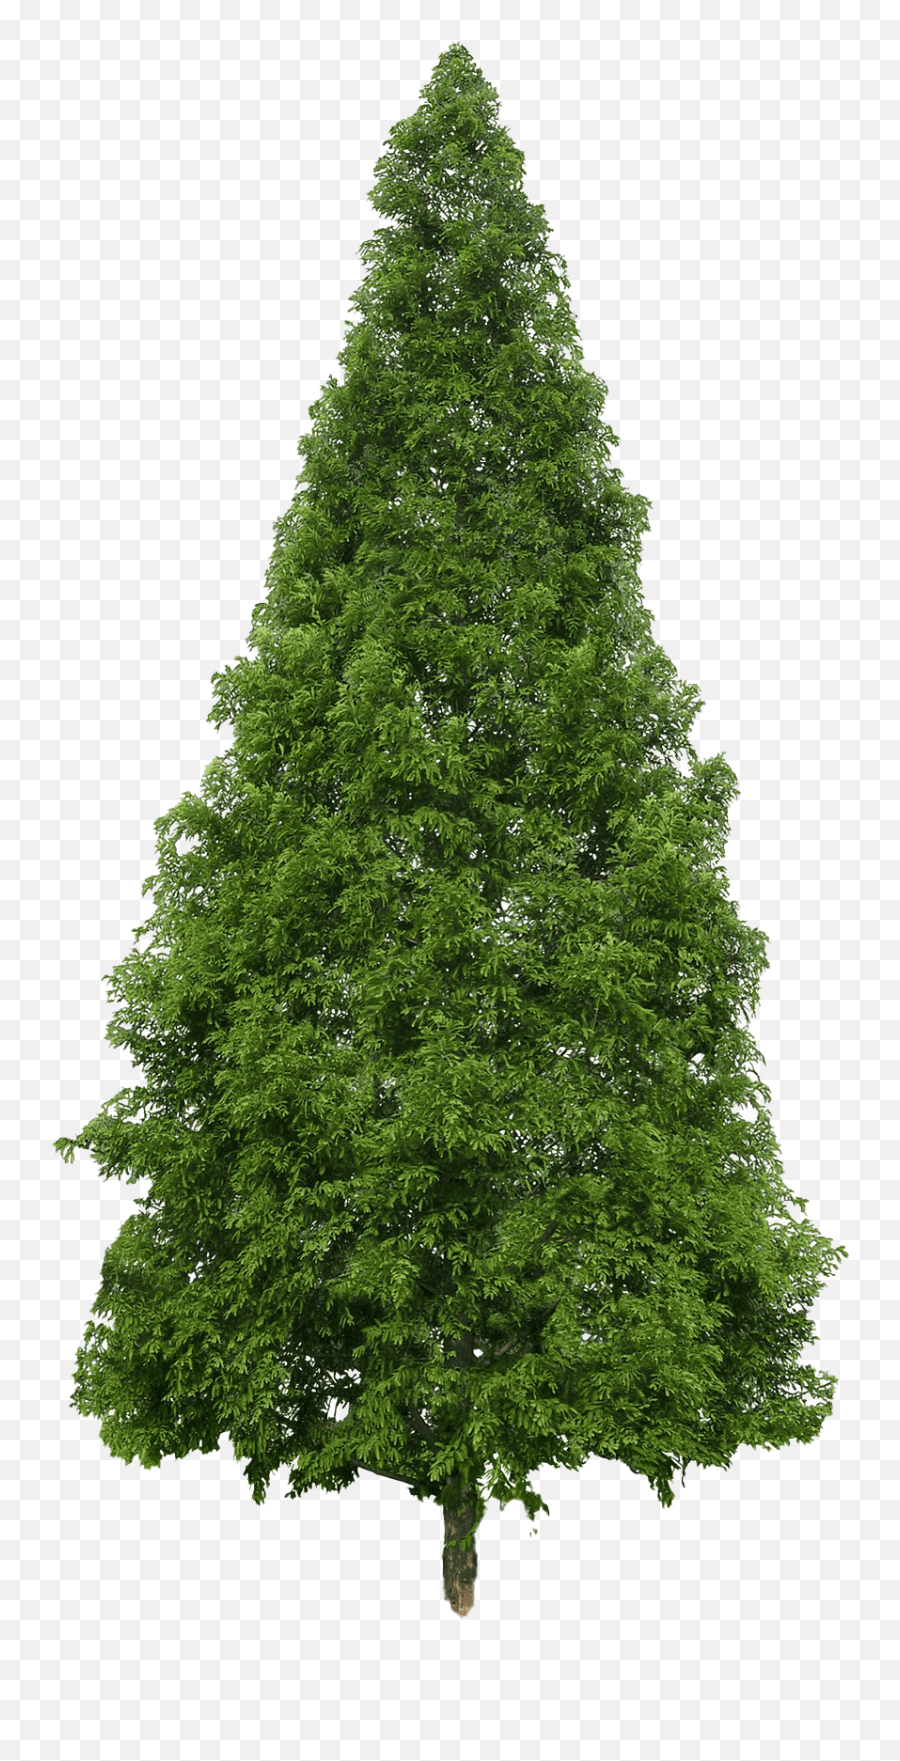 Evergreen Png Image - Evergreen Tree Png,Evergreen Png